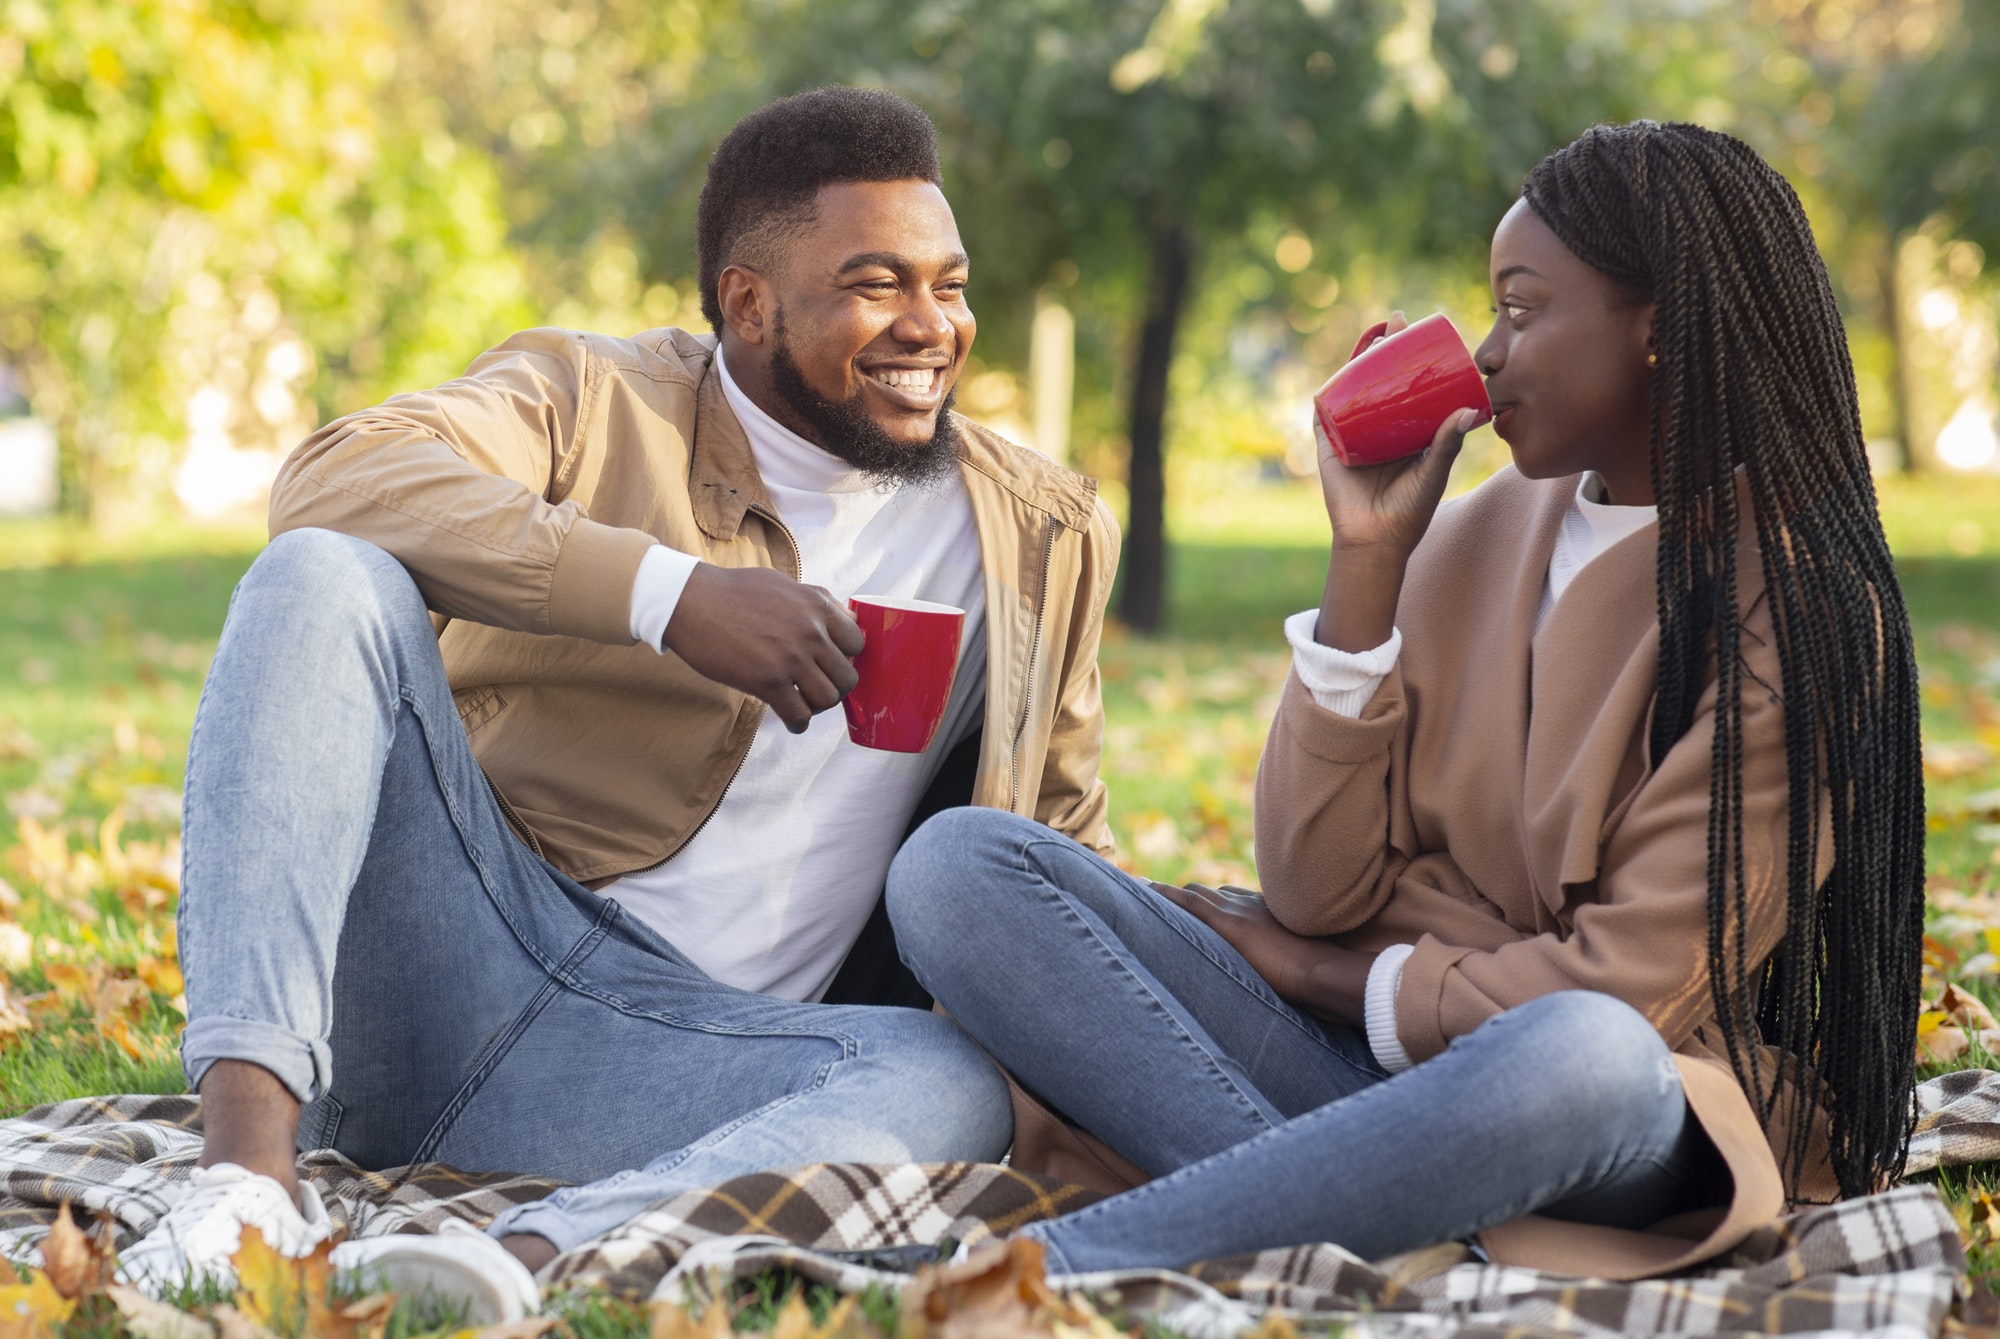 Afro couple dating in autumn park, having picnic and drinking tea